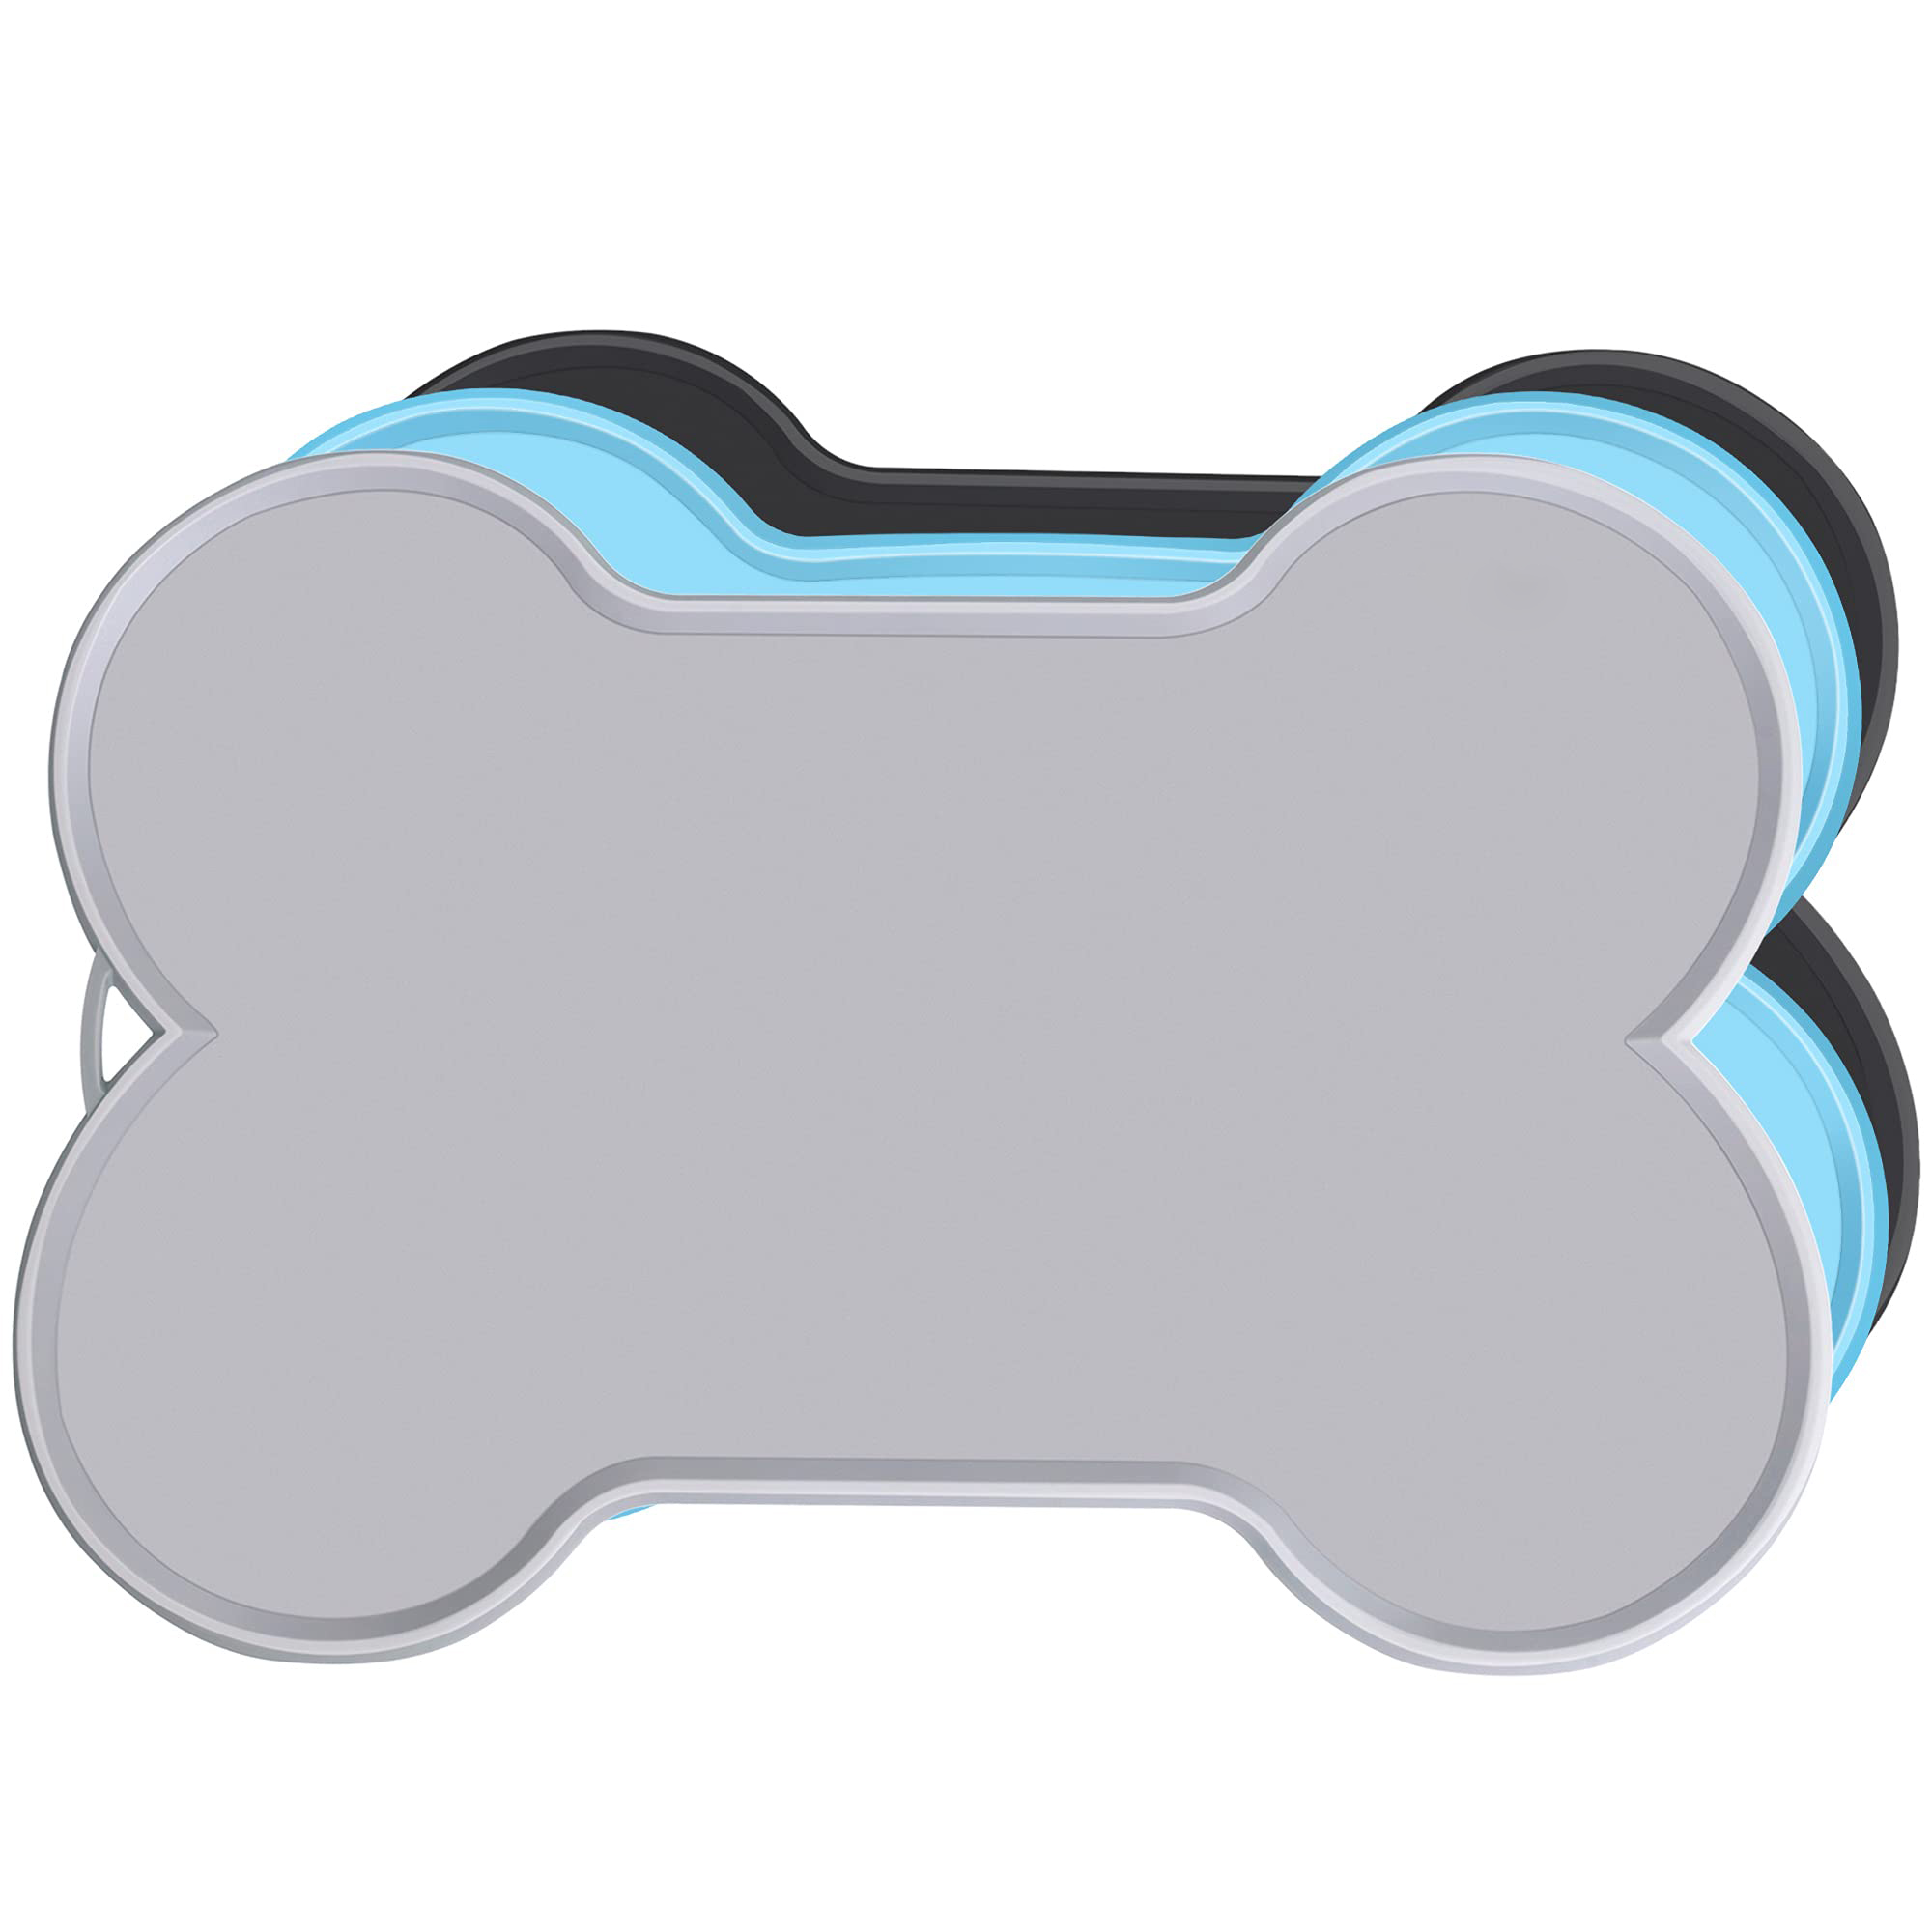 Silicone Waterproof Bone Shaped with Raised Edge Pet Placemat